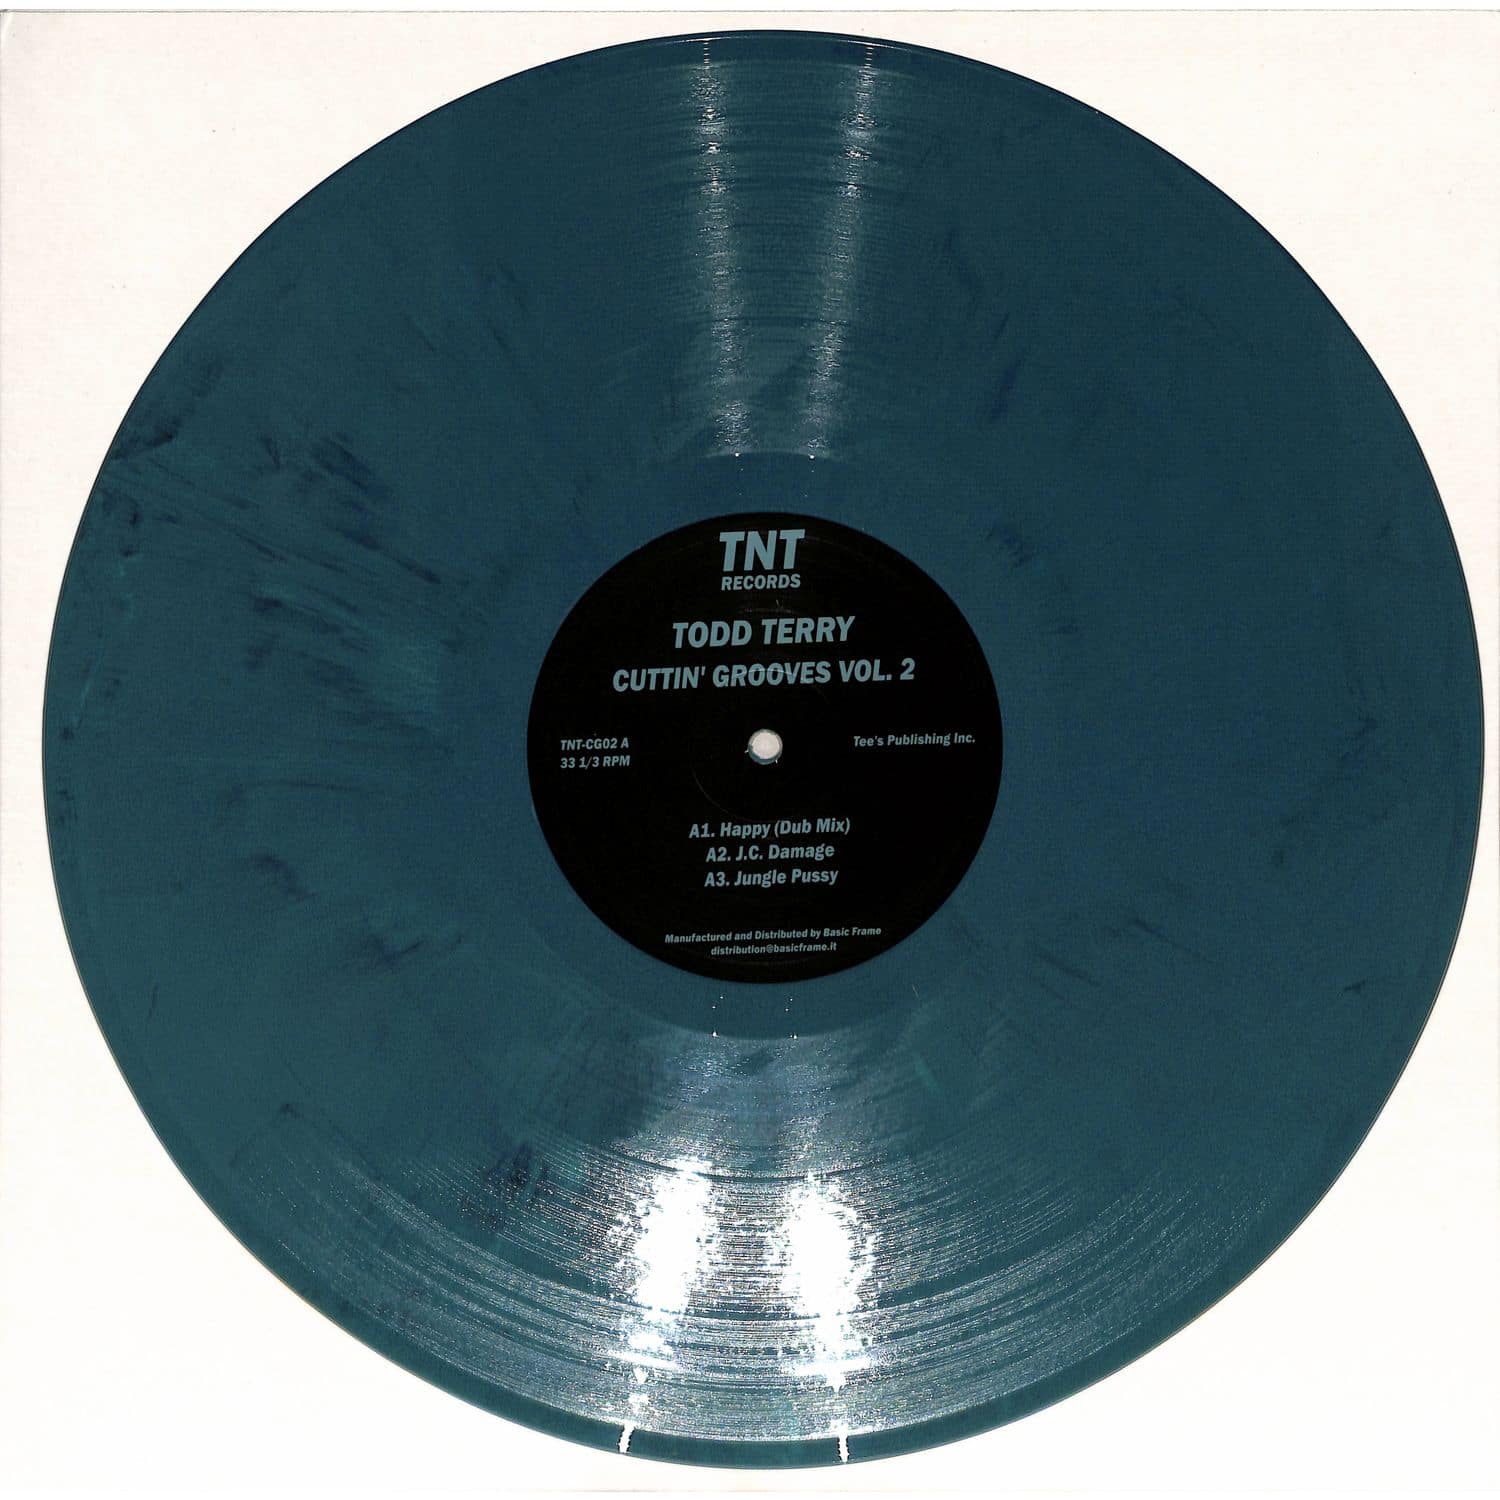 Todd Terry - CUTTIN GROOVES VOL. 2 